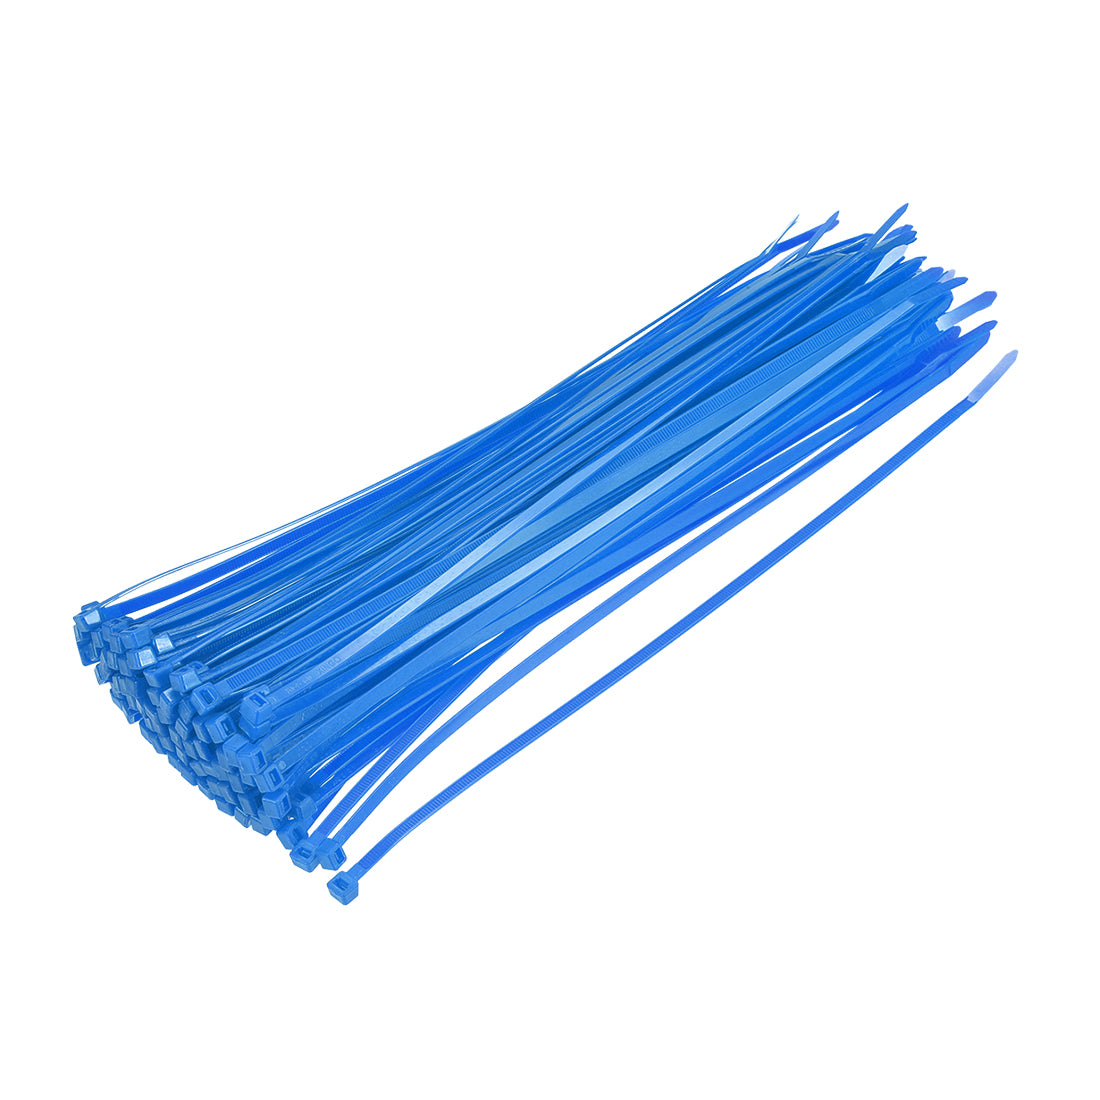 uxcell Uxcell Cable Zip Ties 300mmx4.8mm Self-Locking Nylon Tie Wraps Blue 100pcs